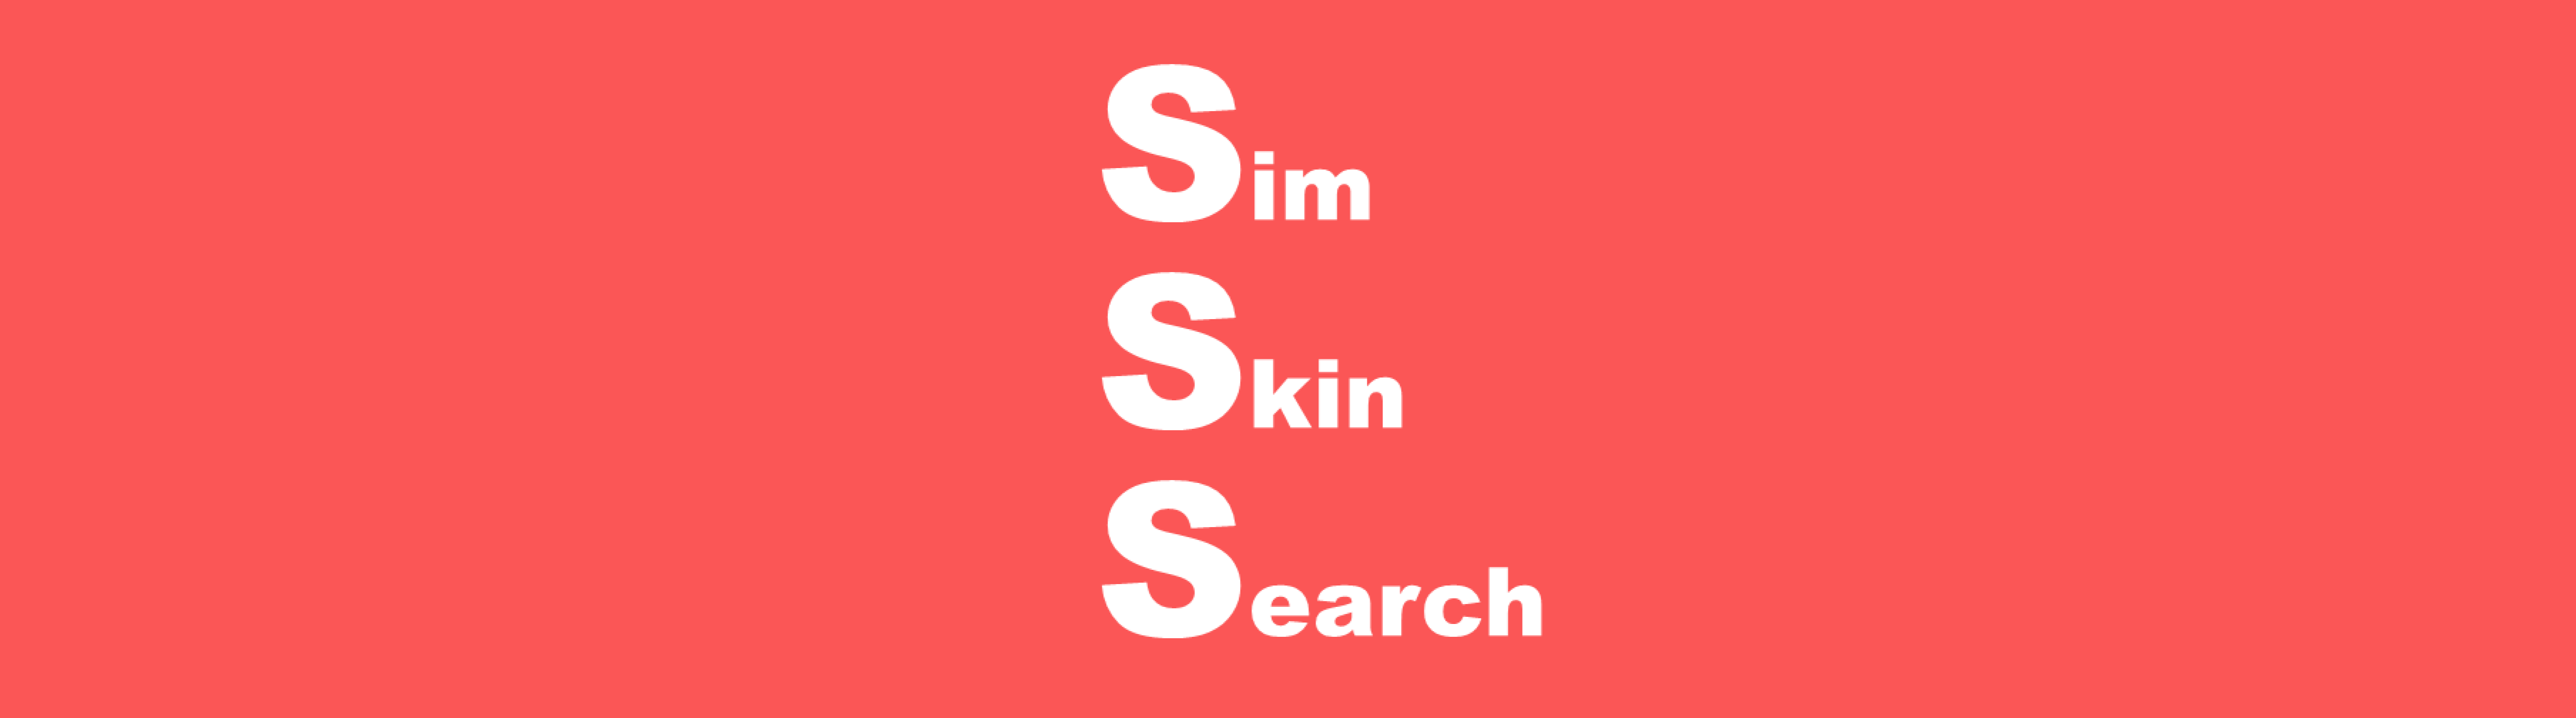 SimSkinSearch